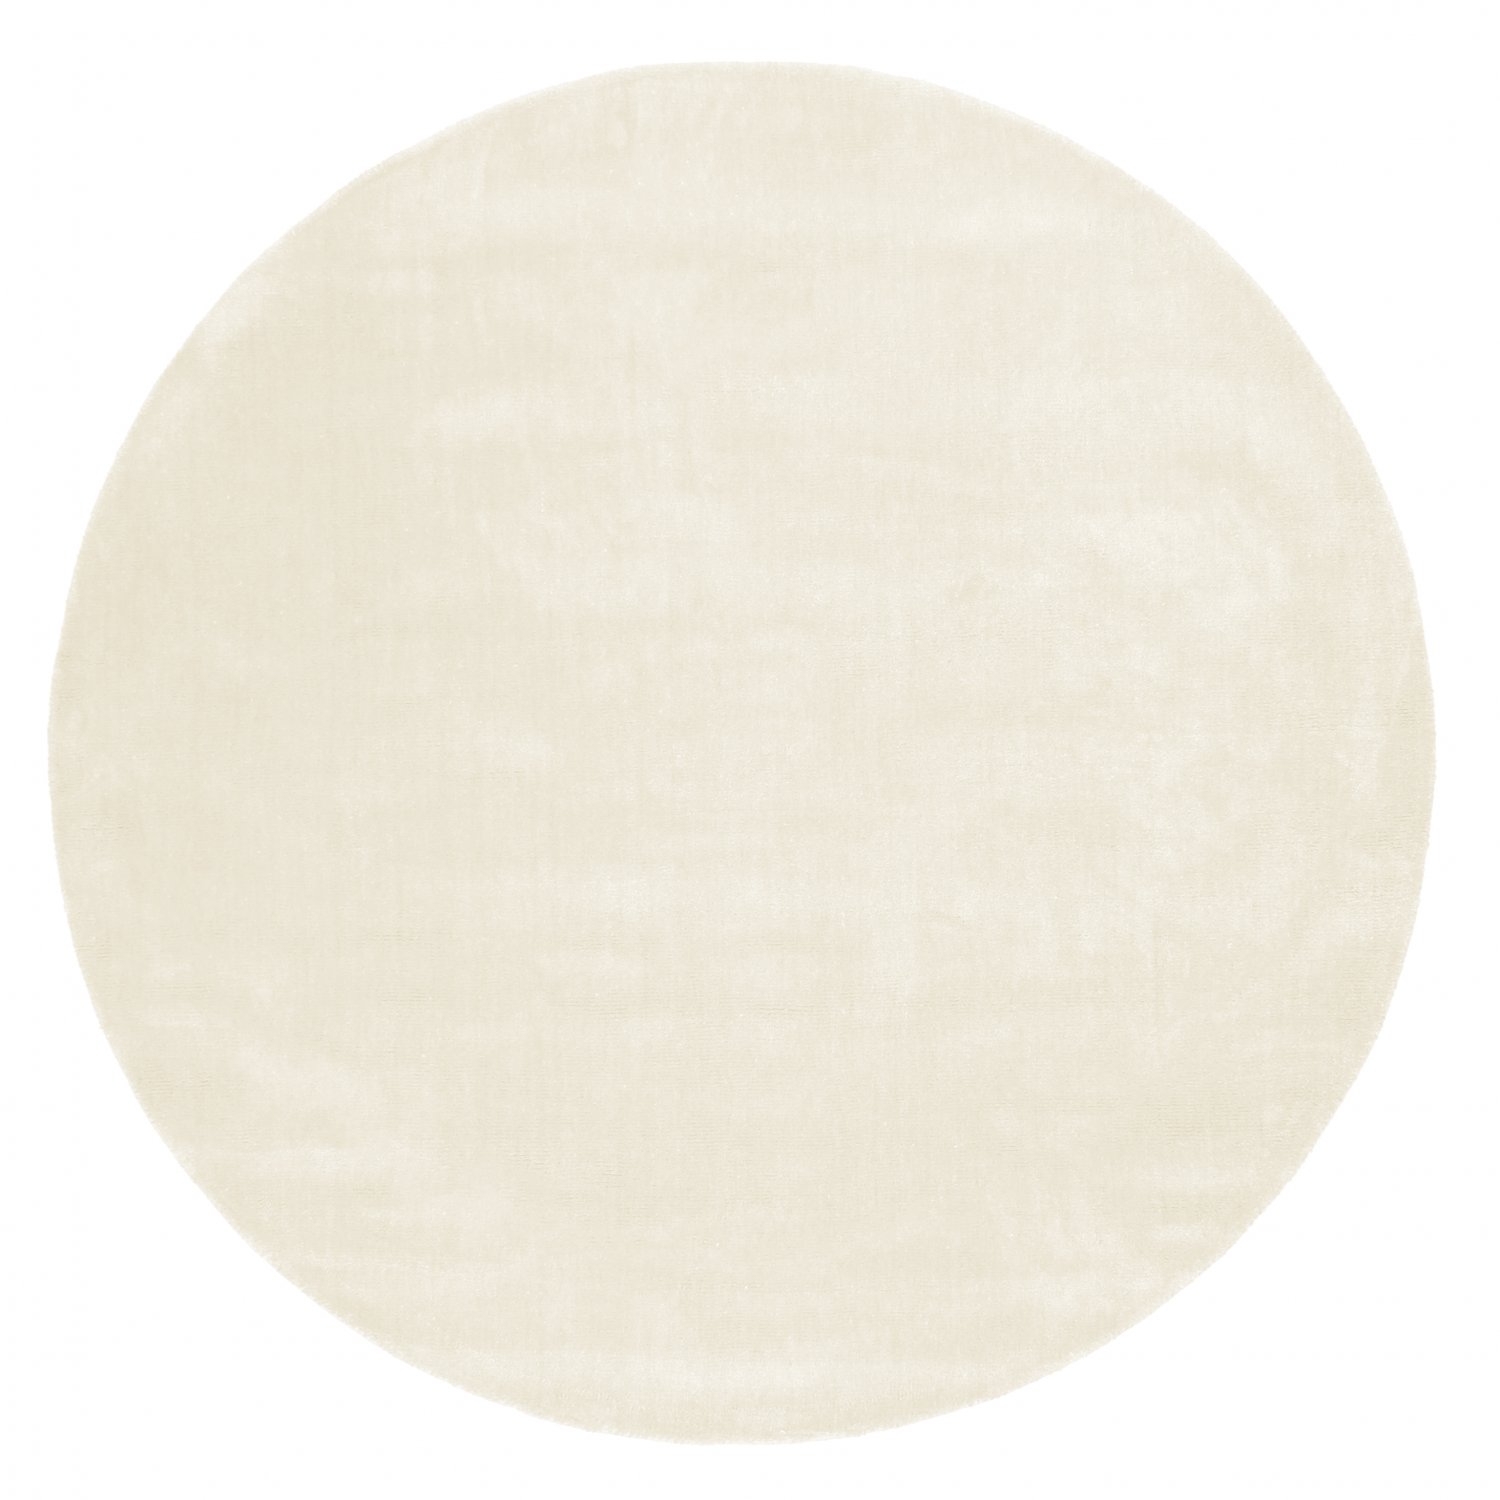 Round rug - Eco Recycled PET (offwhite)